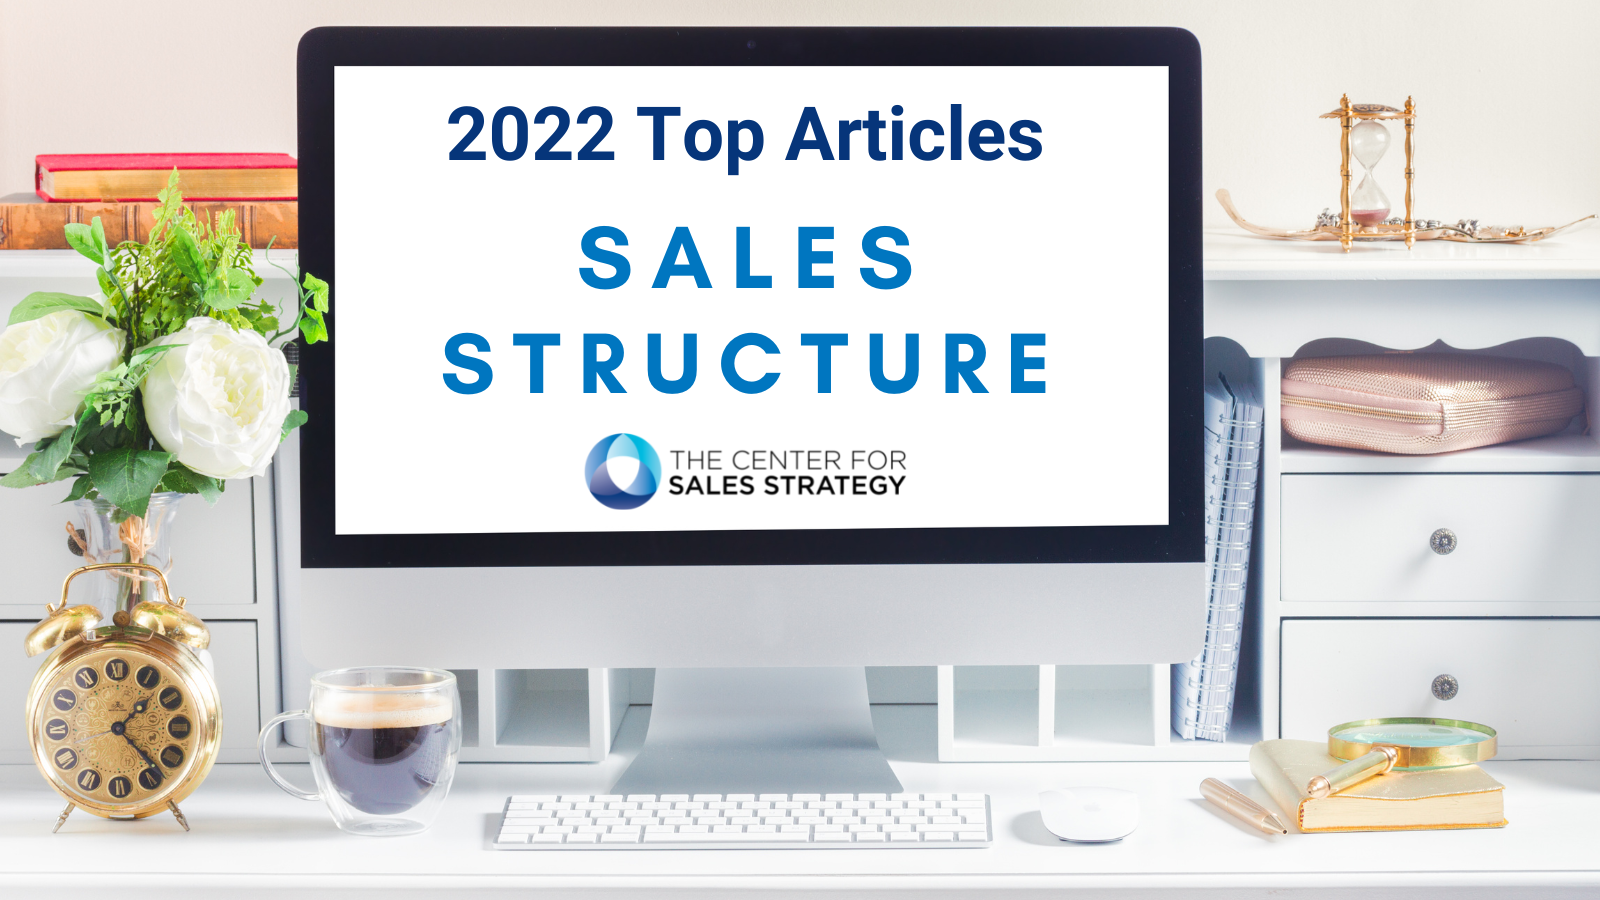 Top 2022 Articles Sales Structure